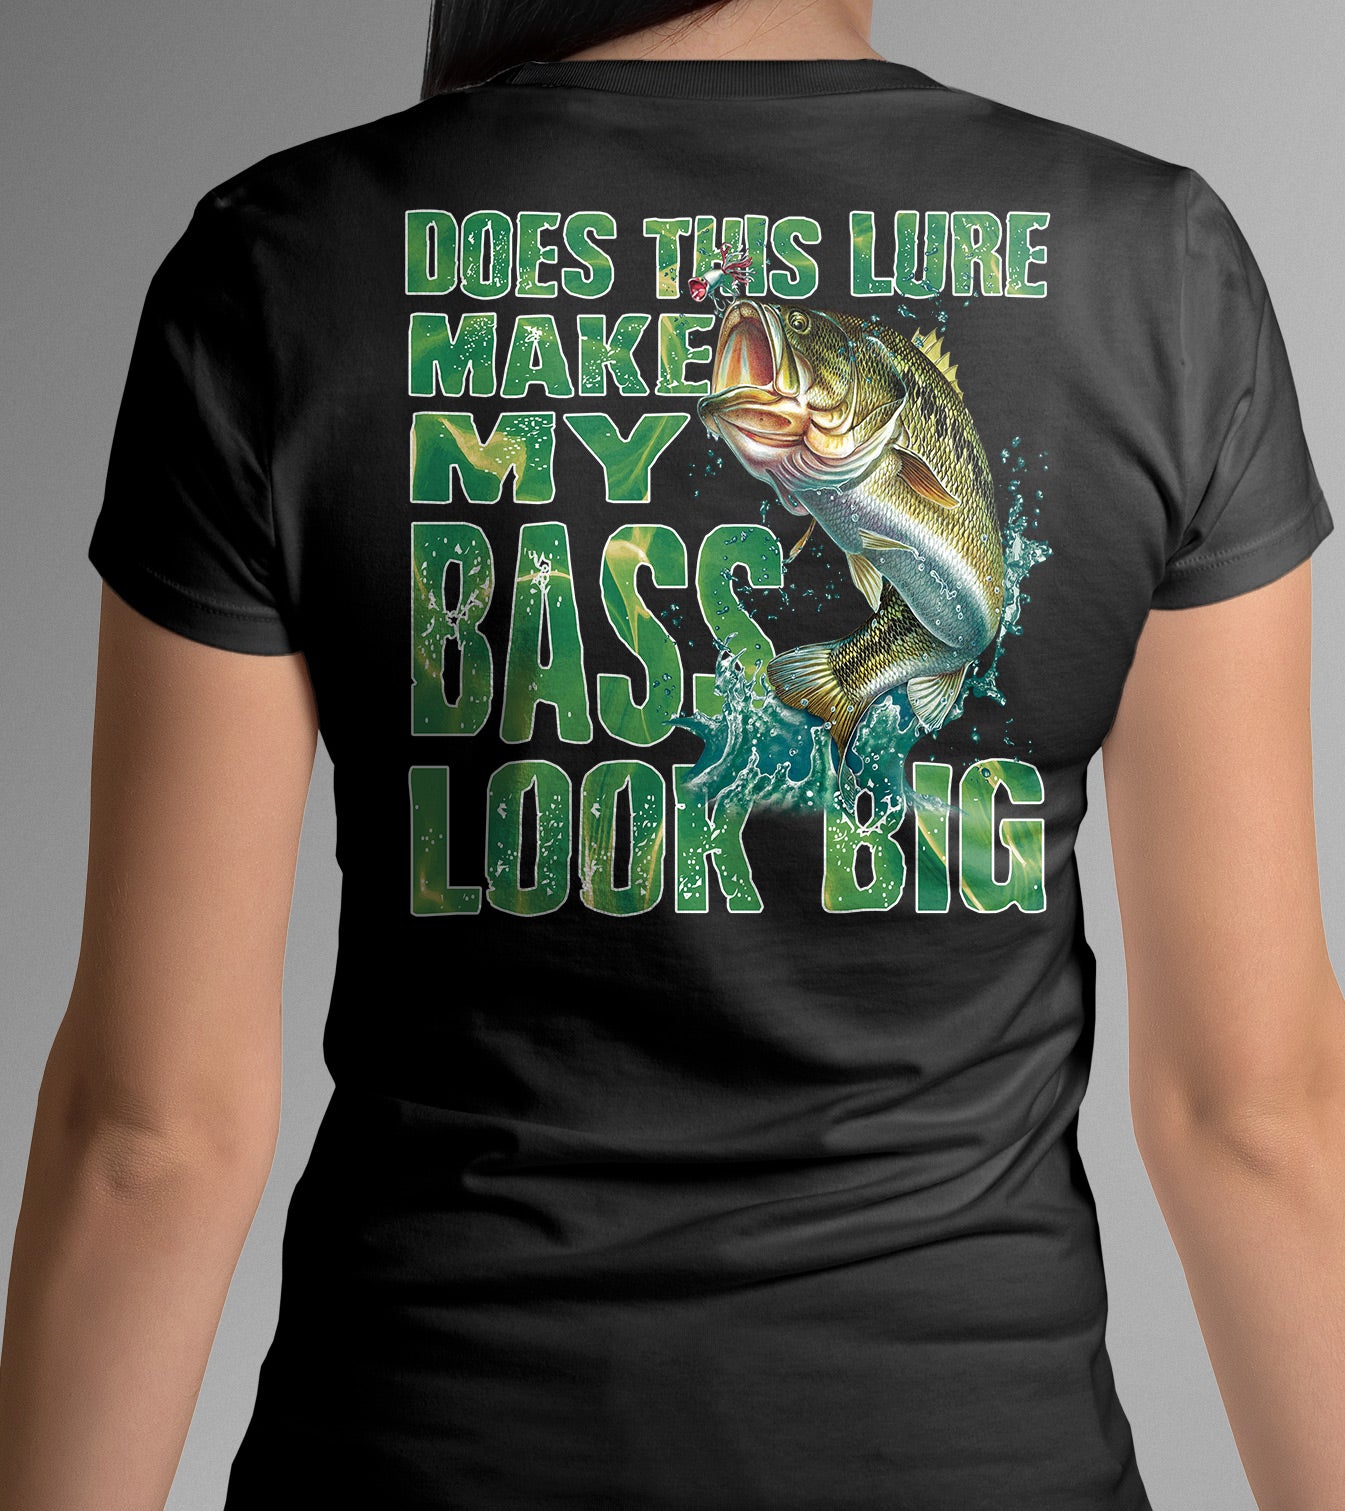 Does This Lure Make My Bass Look Big Funny Fishing Shirts V-Neck Tee / Black / L